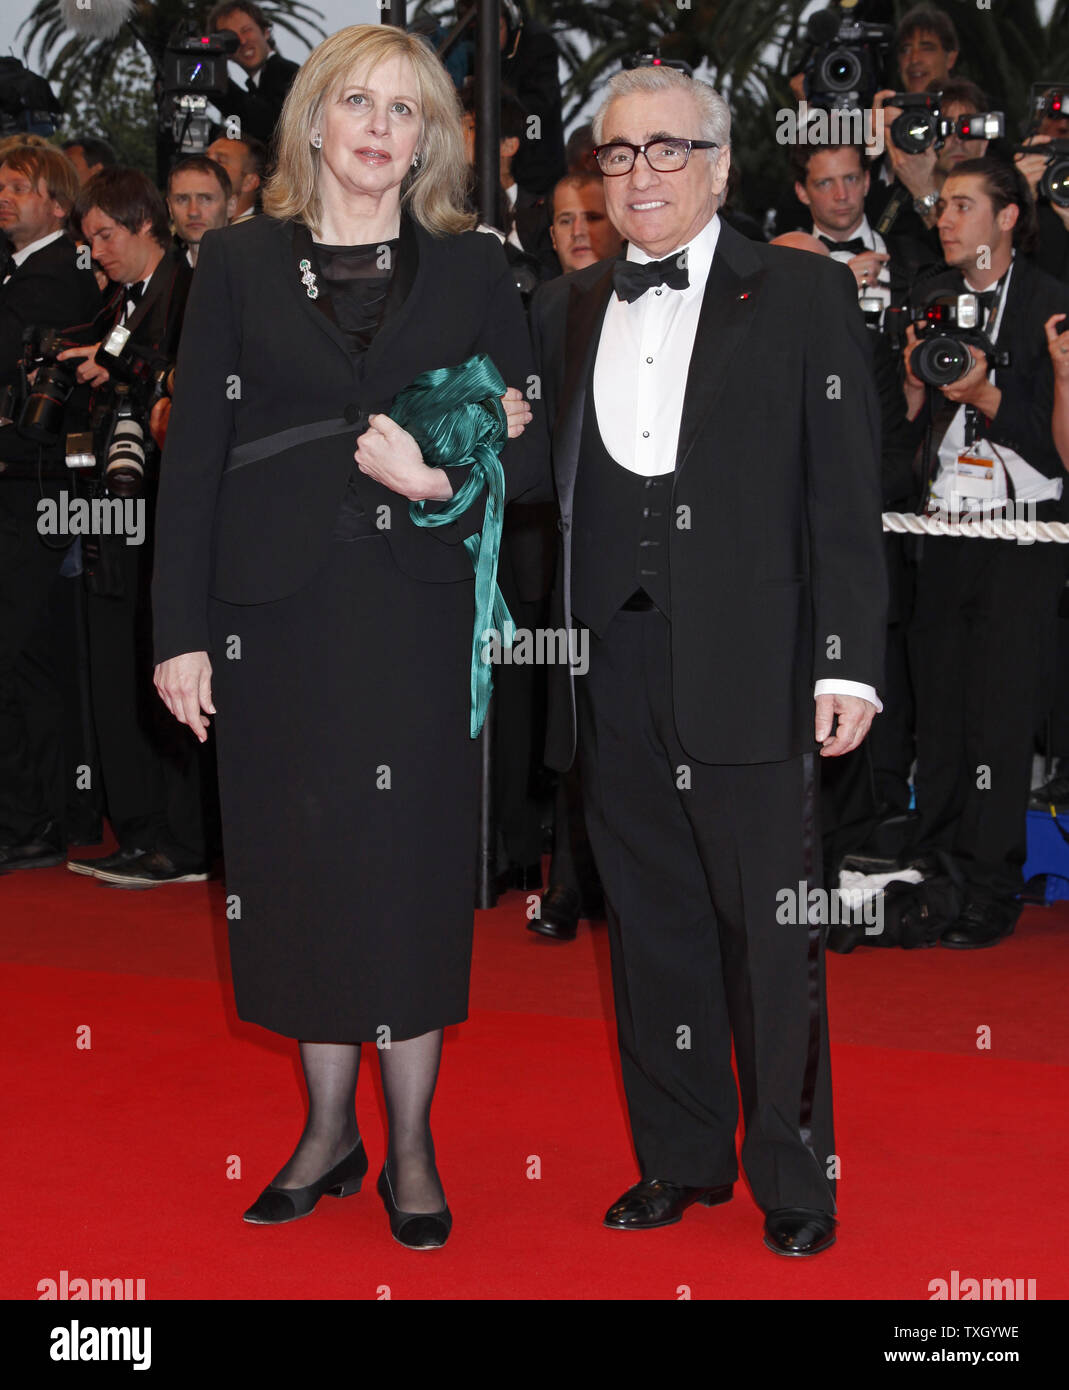 Director Martin Scorsese and his wife Helen Morris arrive on the red carpet before a screening of the film 'Bright Star' at the 62nd annual Cannes Film Festival in Cannes, France on May 15, 2009.   (UPI Photo/David Silpa) Stock Photo